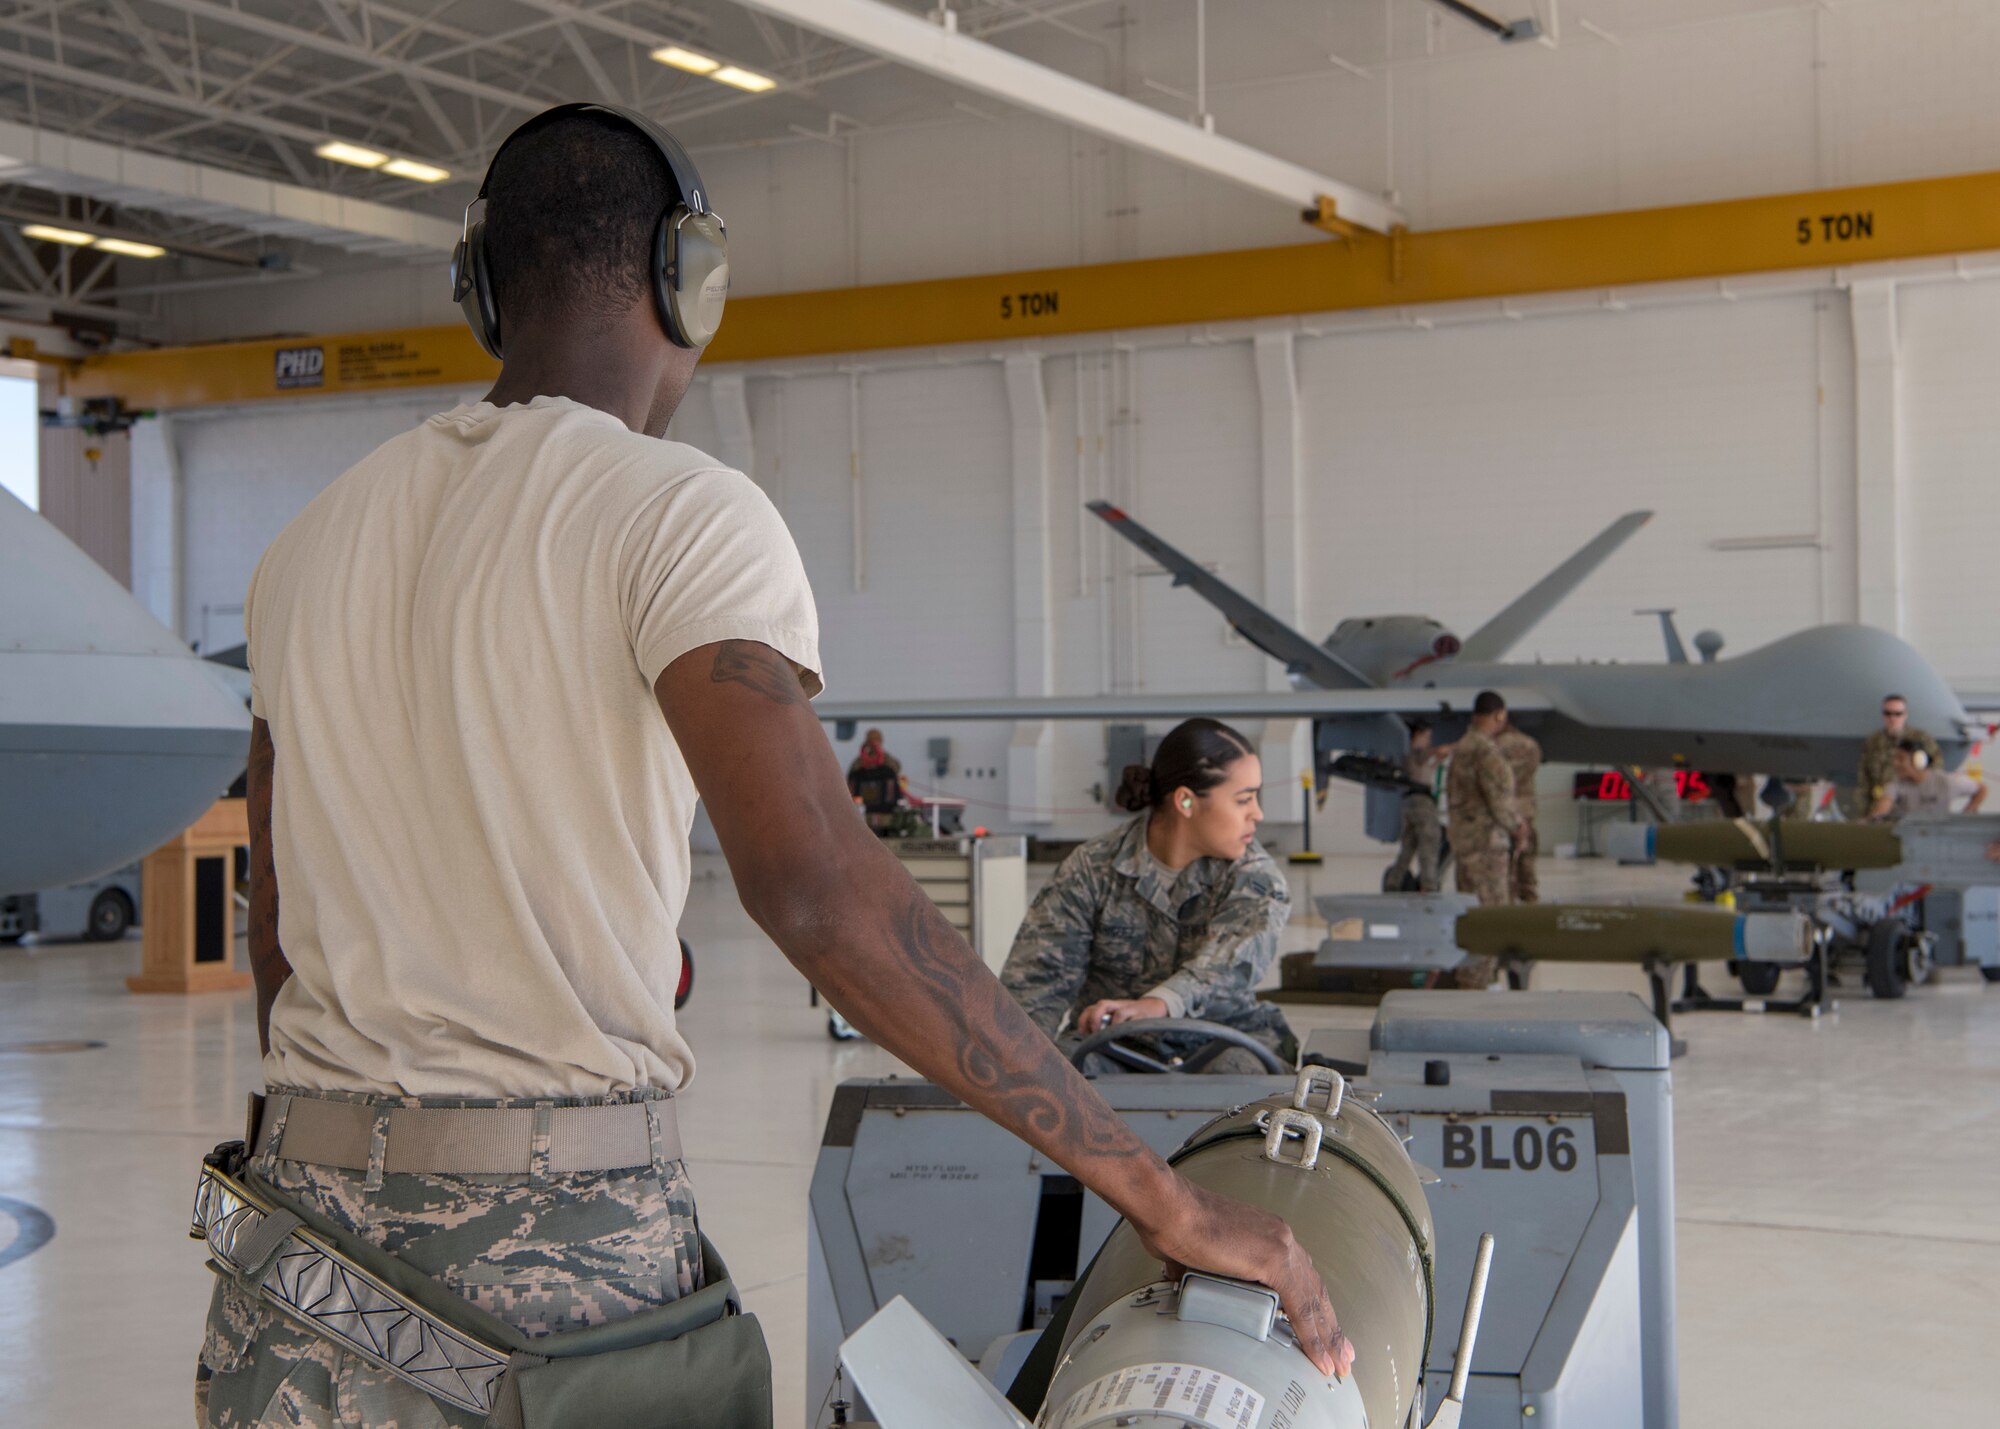 Staff Sgt. Kendrick Johnson, 9th Aircraft Maintenance Unit weapons load crew chief, steadies an inert bomb while Airman 1st Class Jocilyn Rodriguez, 9th Aircraft Maintenance Unit weapons load crew member, directs it to be loaded on an MQ-9 Reaper, Oct. 28, 2019, on Holloman Air Force Base, N.M. Two F-16 Vipers and two MQ-9 Reapers were used to test the loading skills of 12 Airmen during the 2019 third quarter load competition. (U.S. Air Force photo by Airman 1st Class Autumn Vogt)